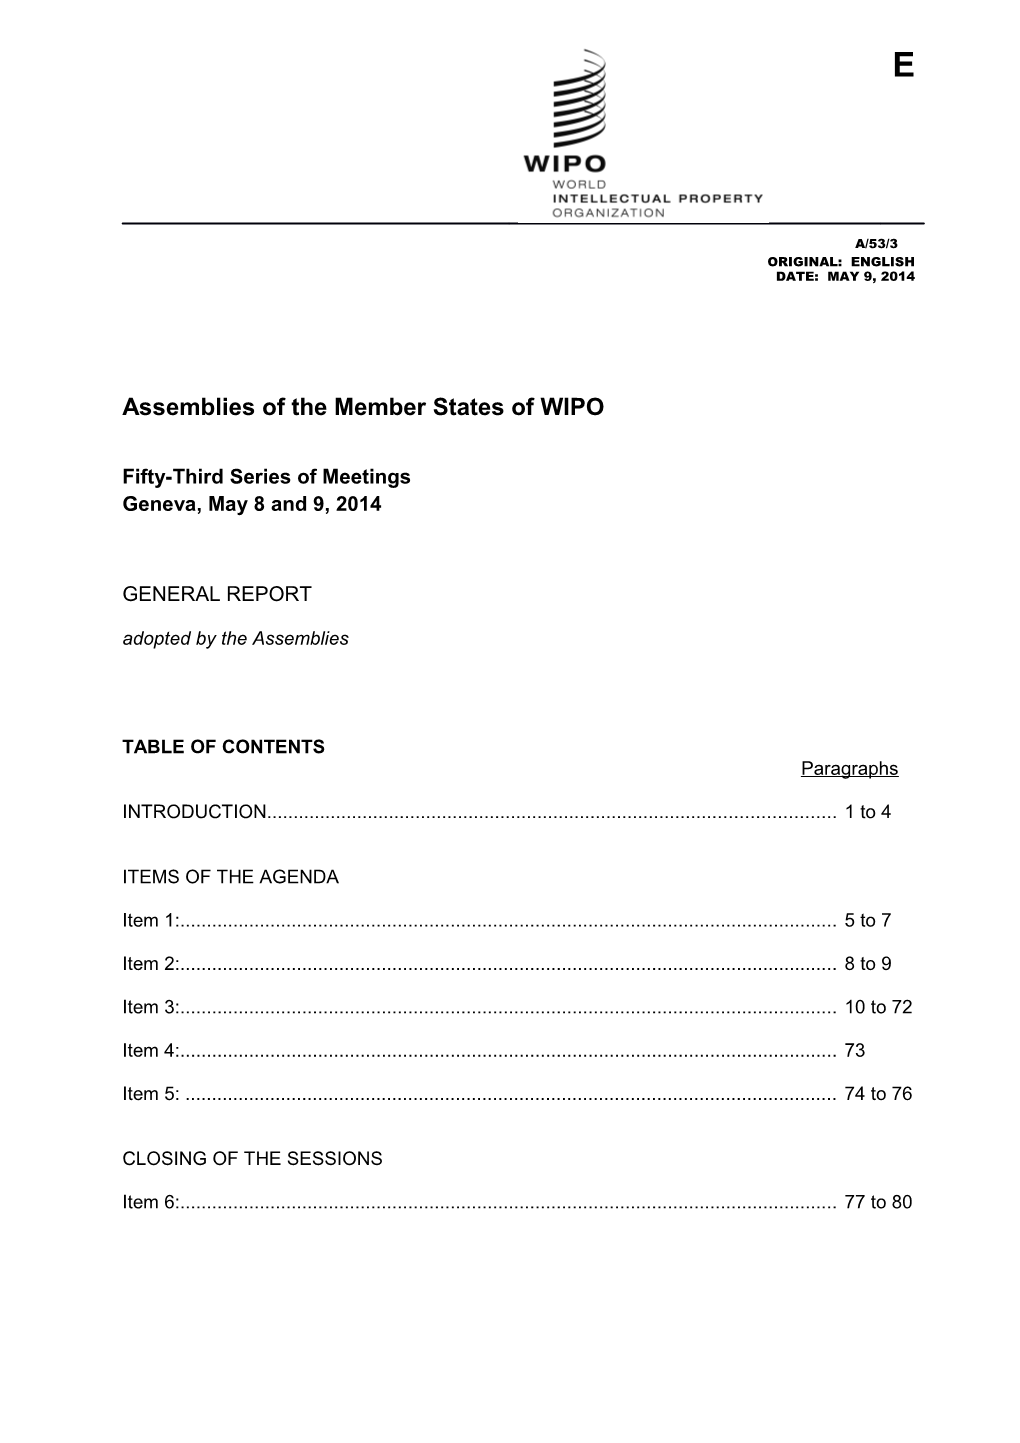 Assemblies of the Member States of WIPO s5